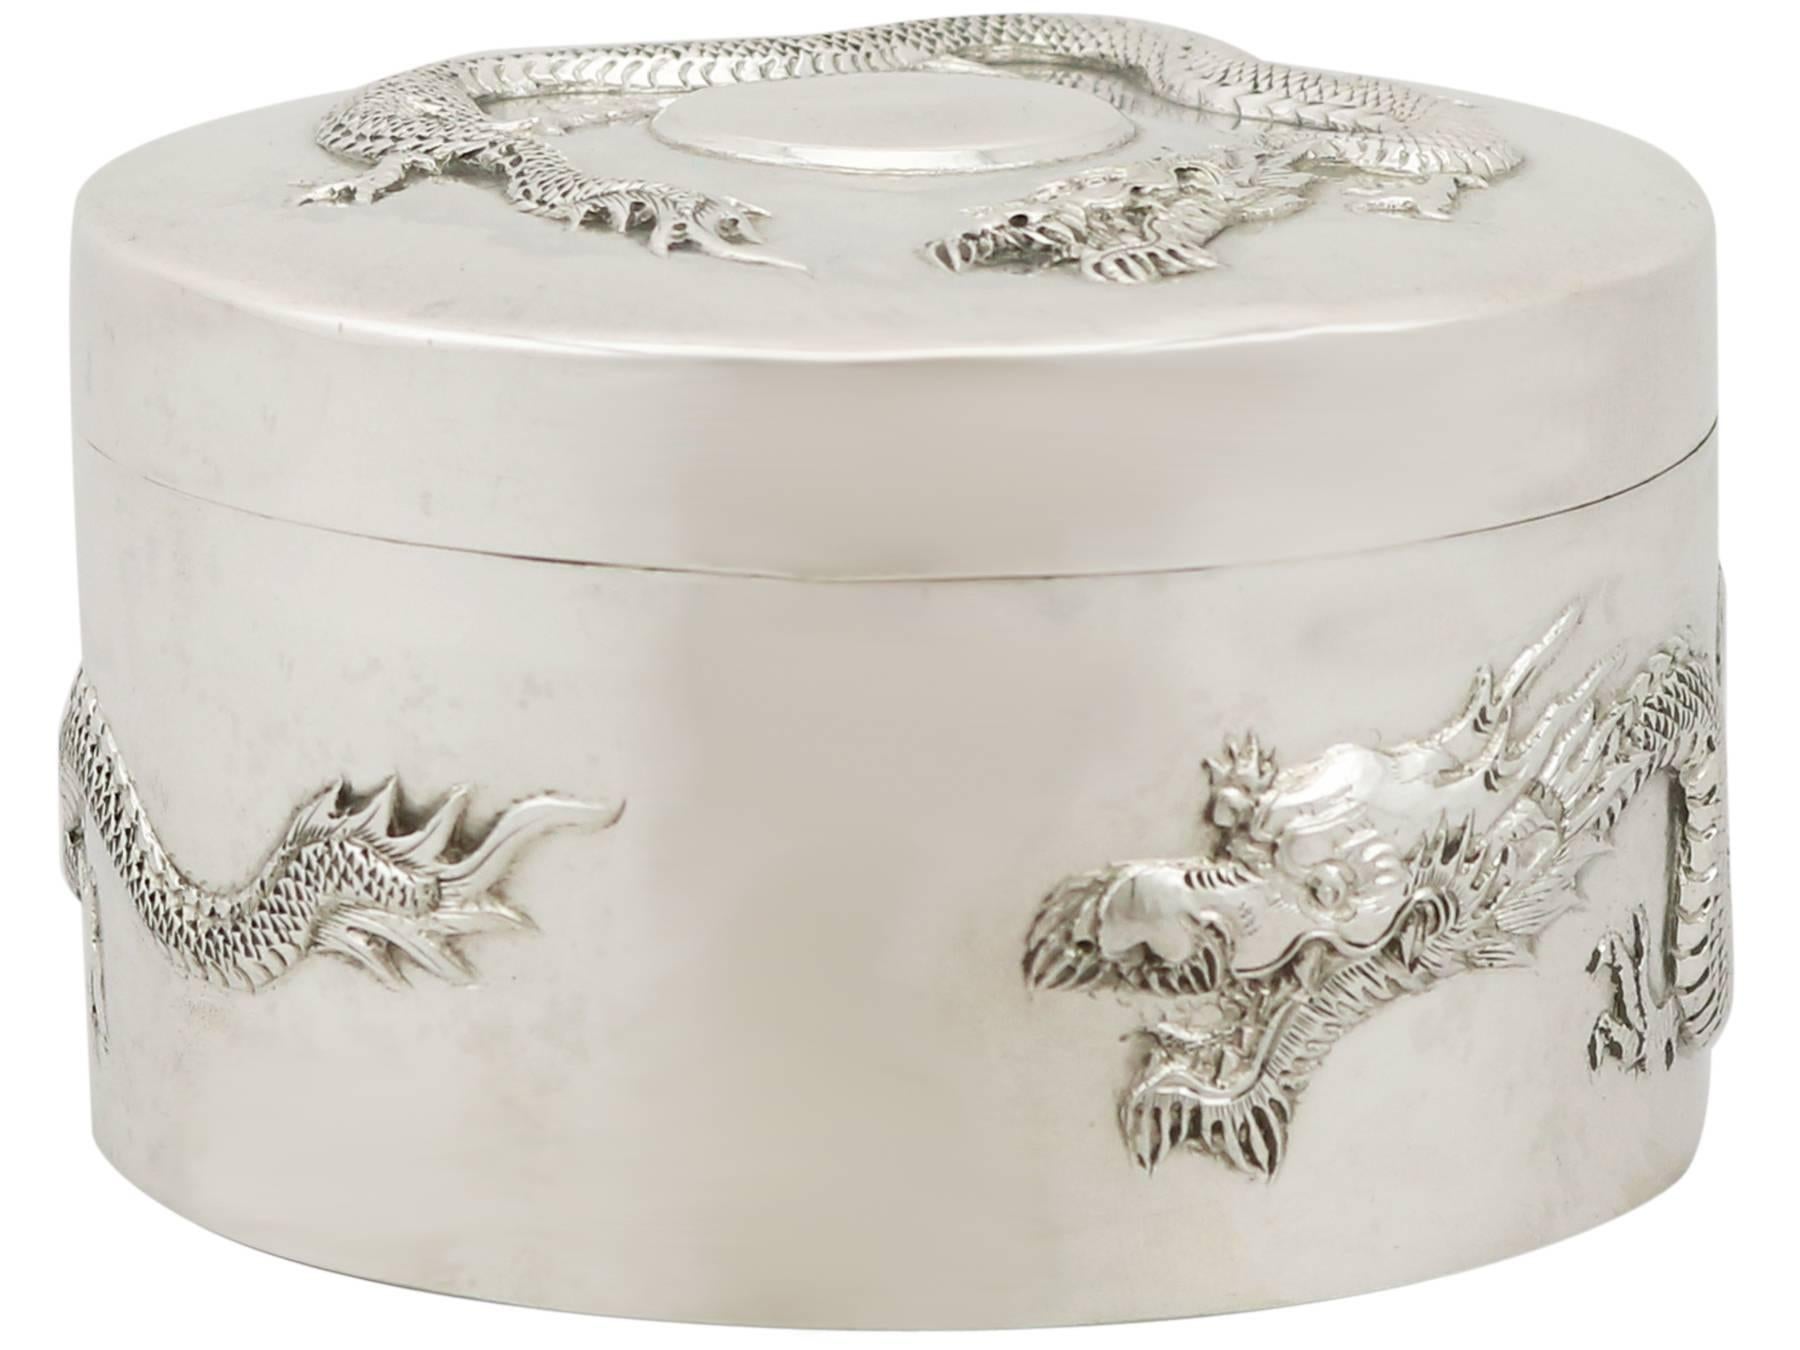 An exceptional, fine and impressive antique Chinese Export silver dragon box, an addition to our collection of boxes and cases.

This fine antique Chinese Export Silver (CES) box has a cylindrical form.

The surface of the body is embellished